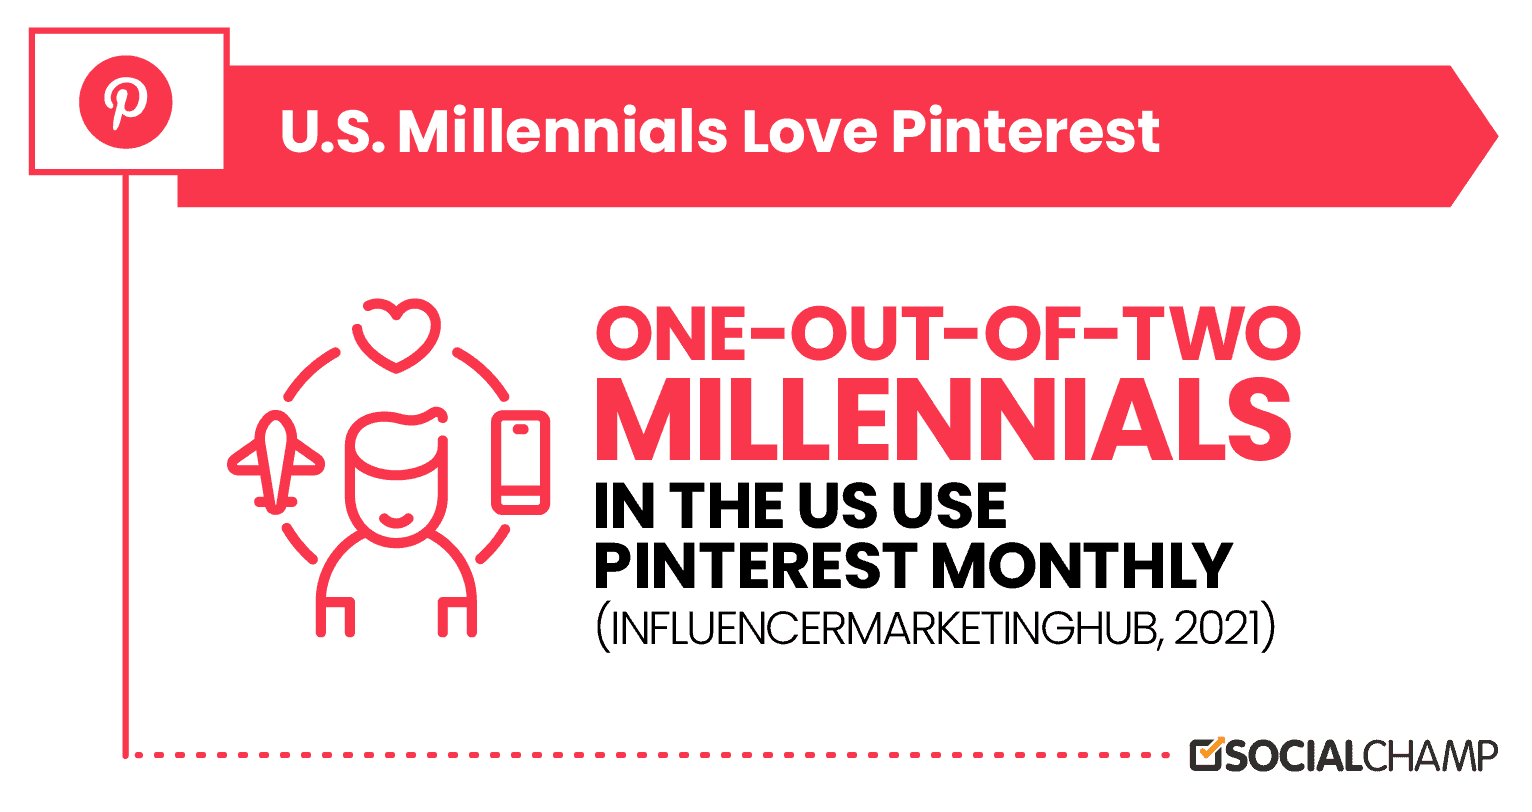 1 Out Of 2 Millennials In The U.S. Uses Pinterest Monthly